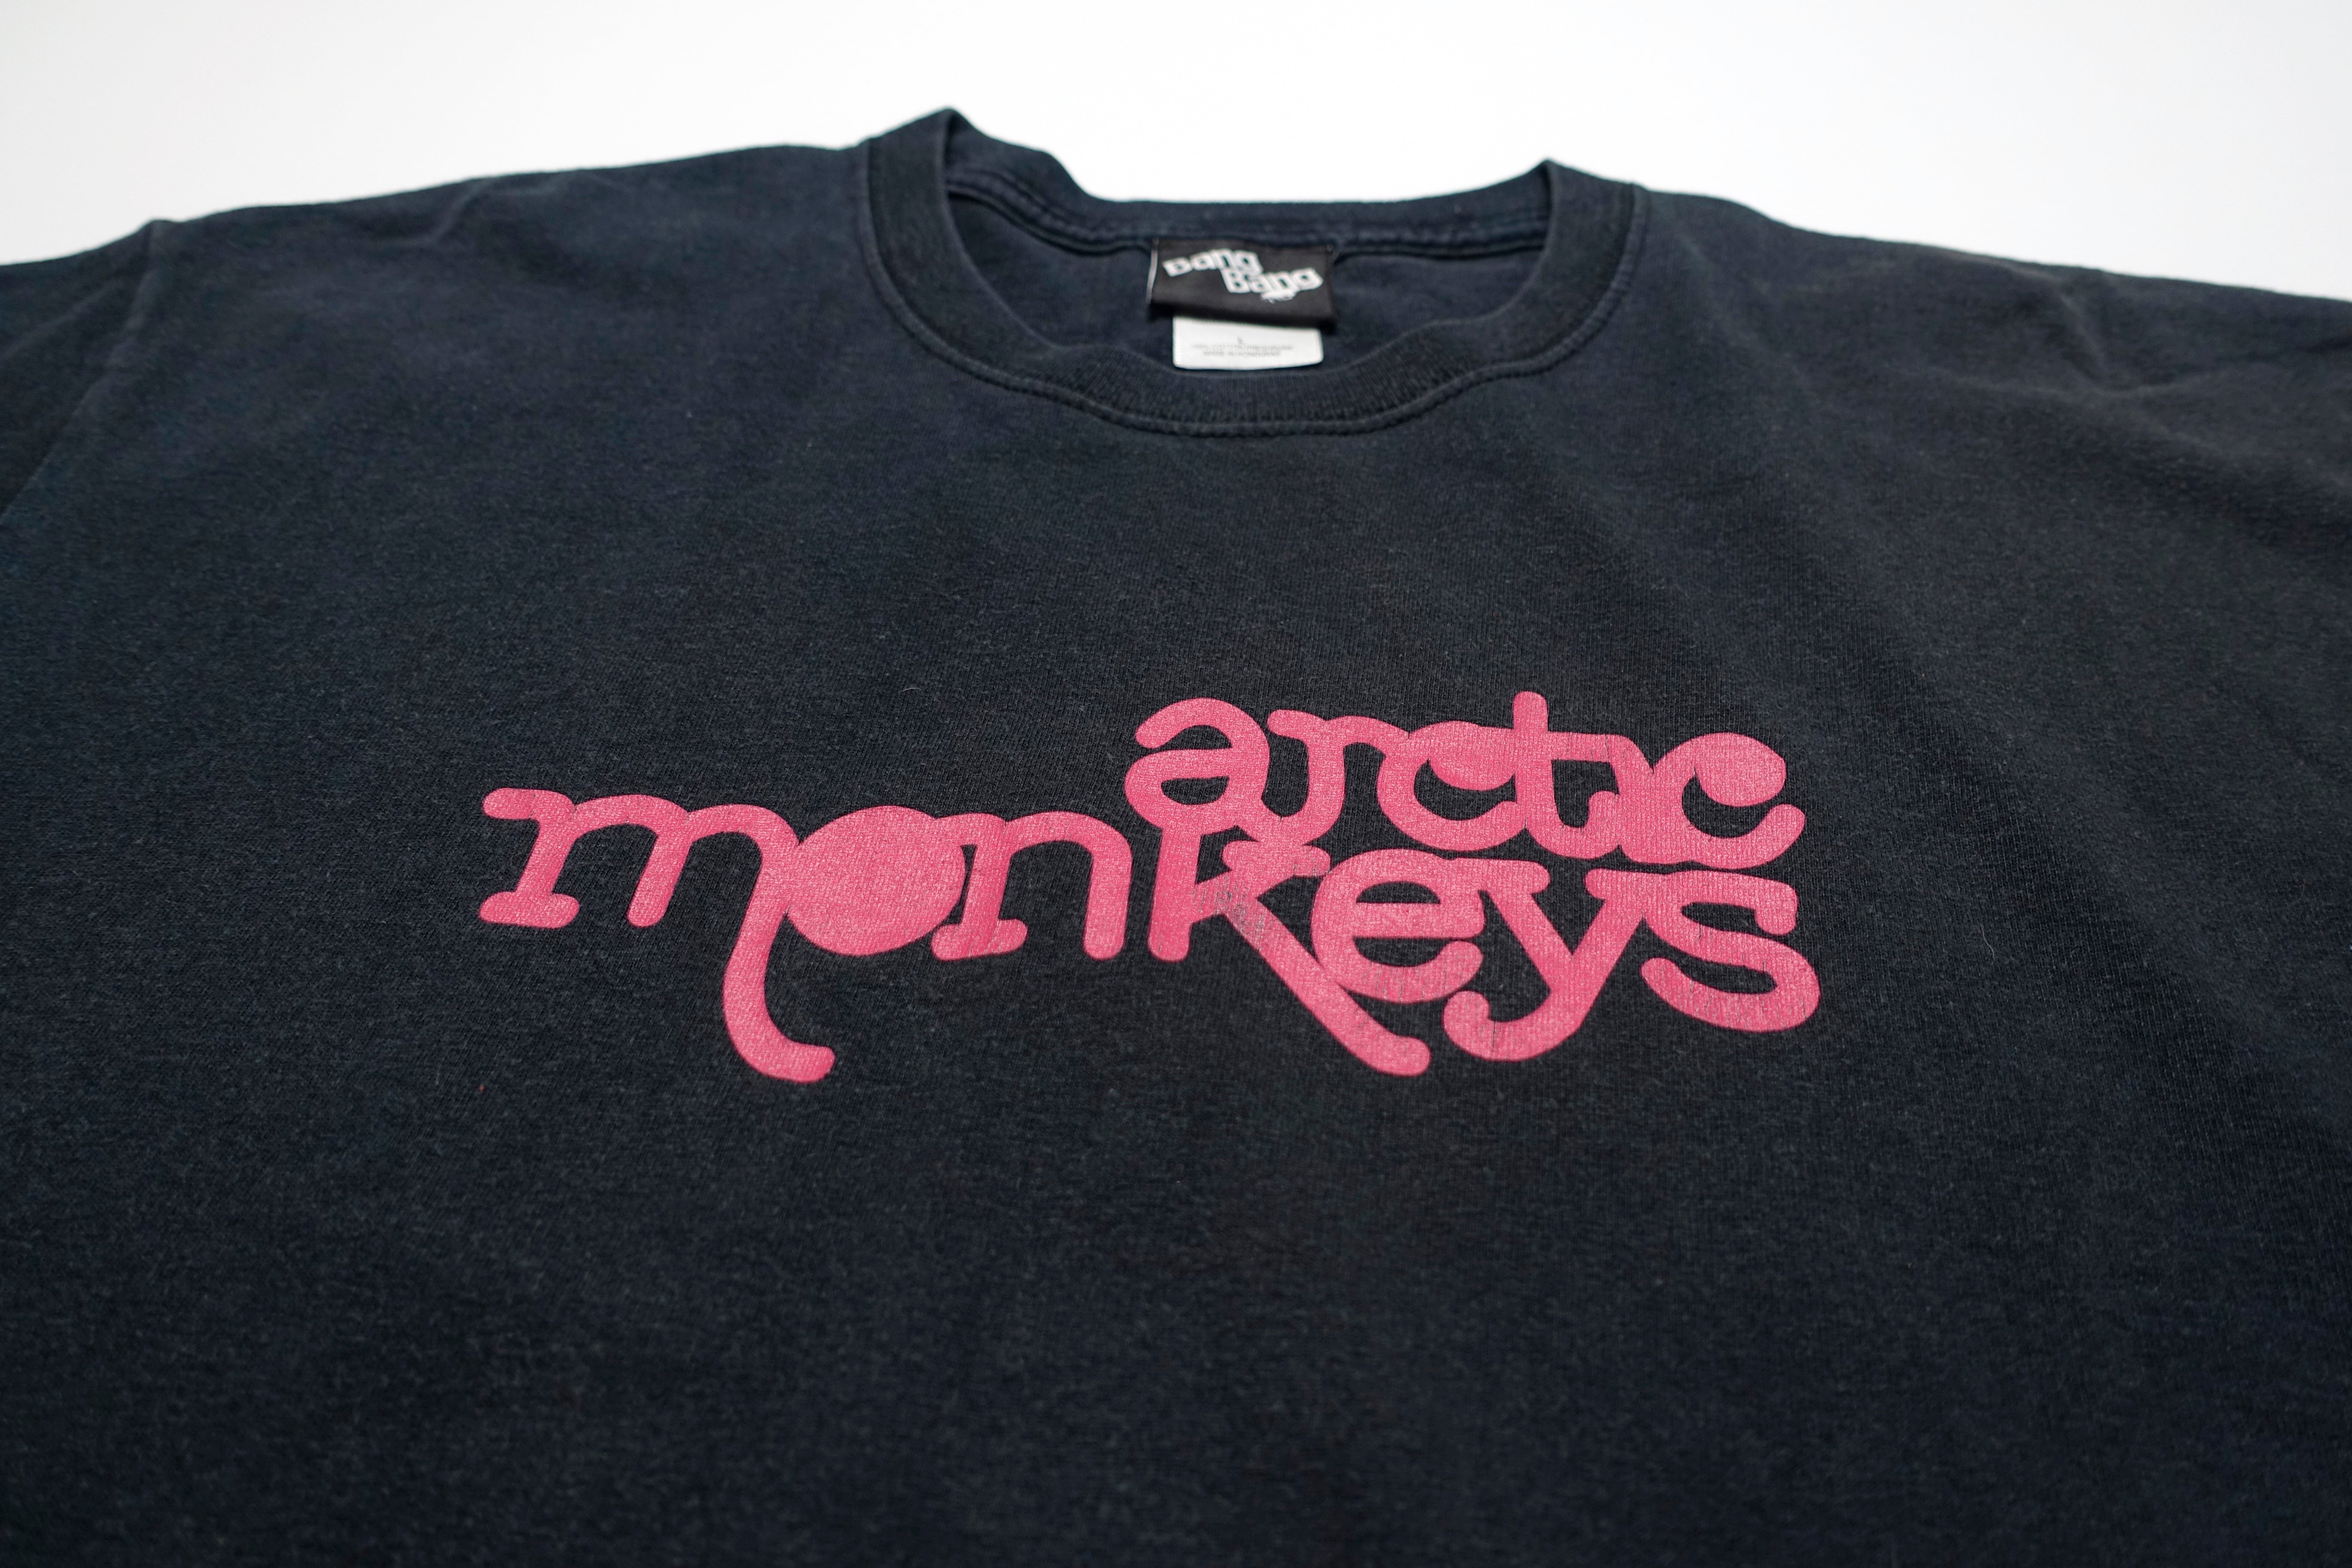 Arctic Monkeys - Whatever People Say I Am, That's What I'm Not Tour Shirt Size Large